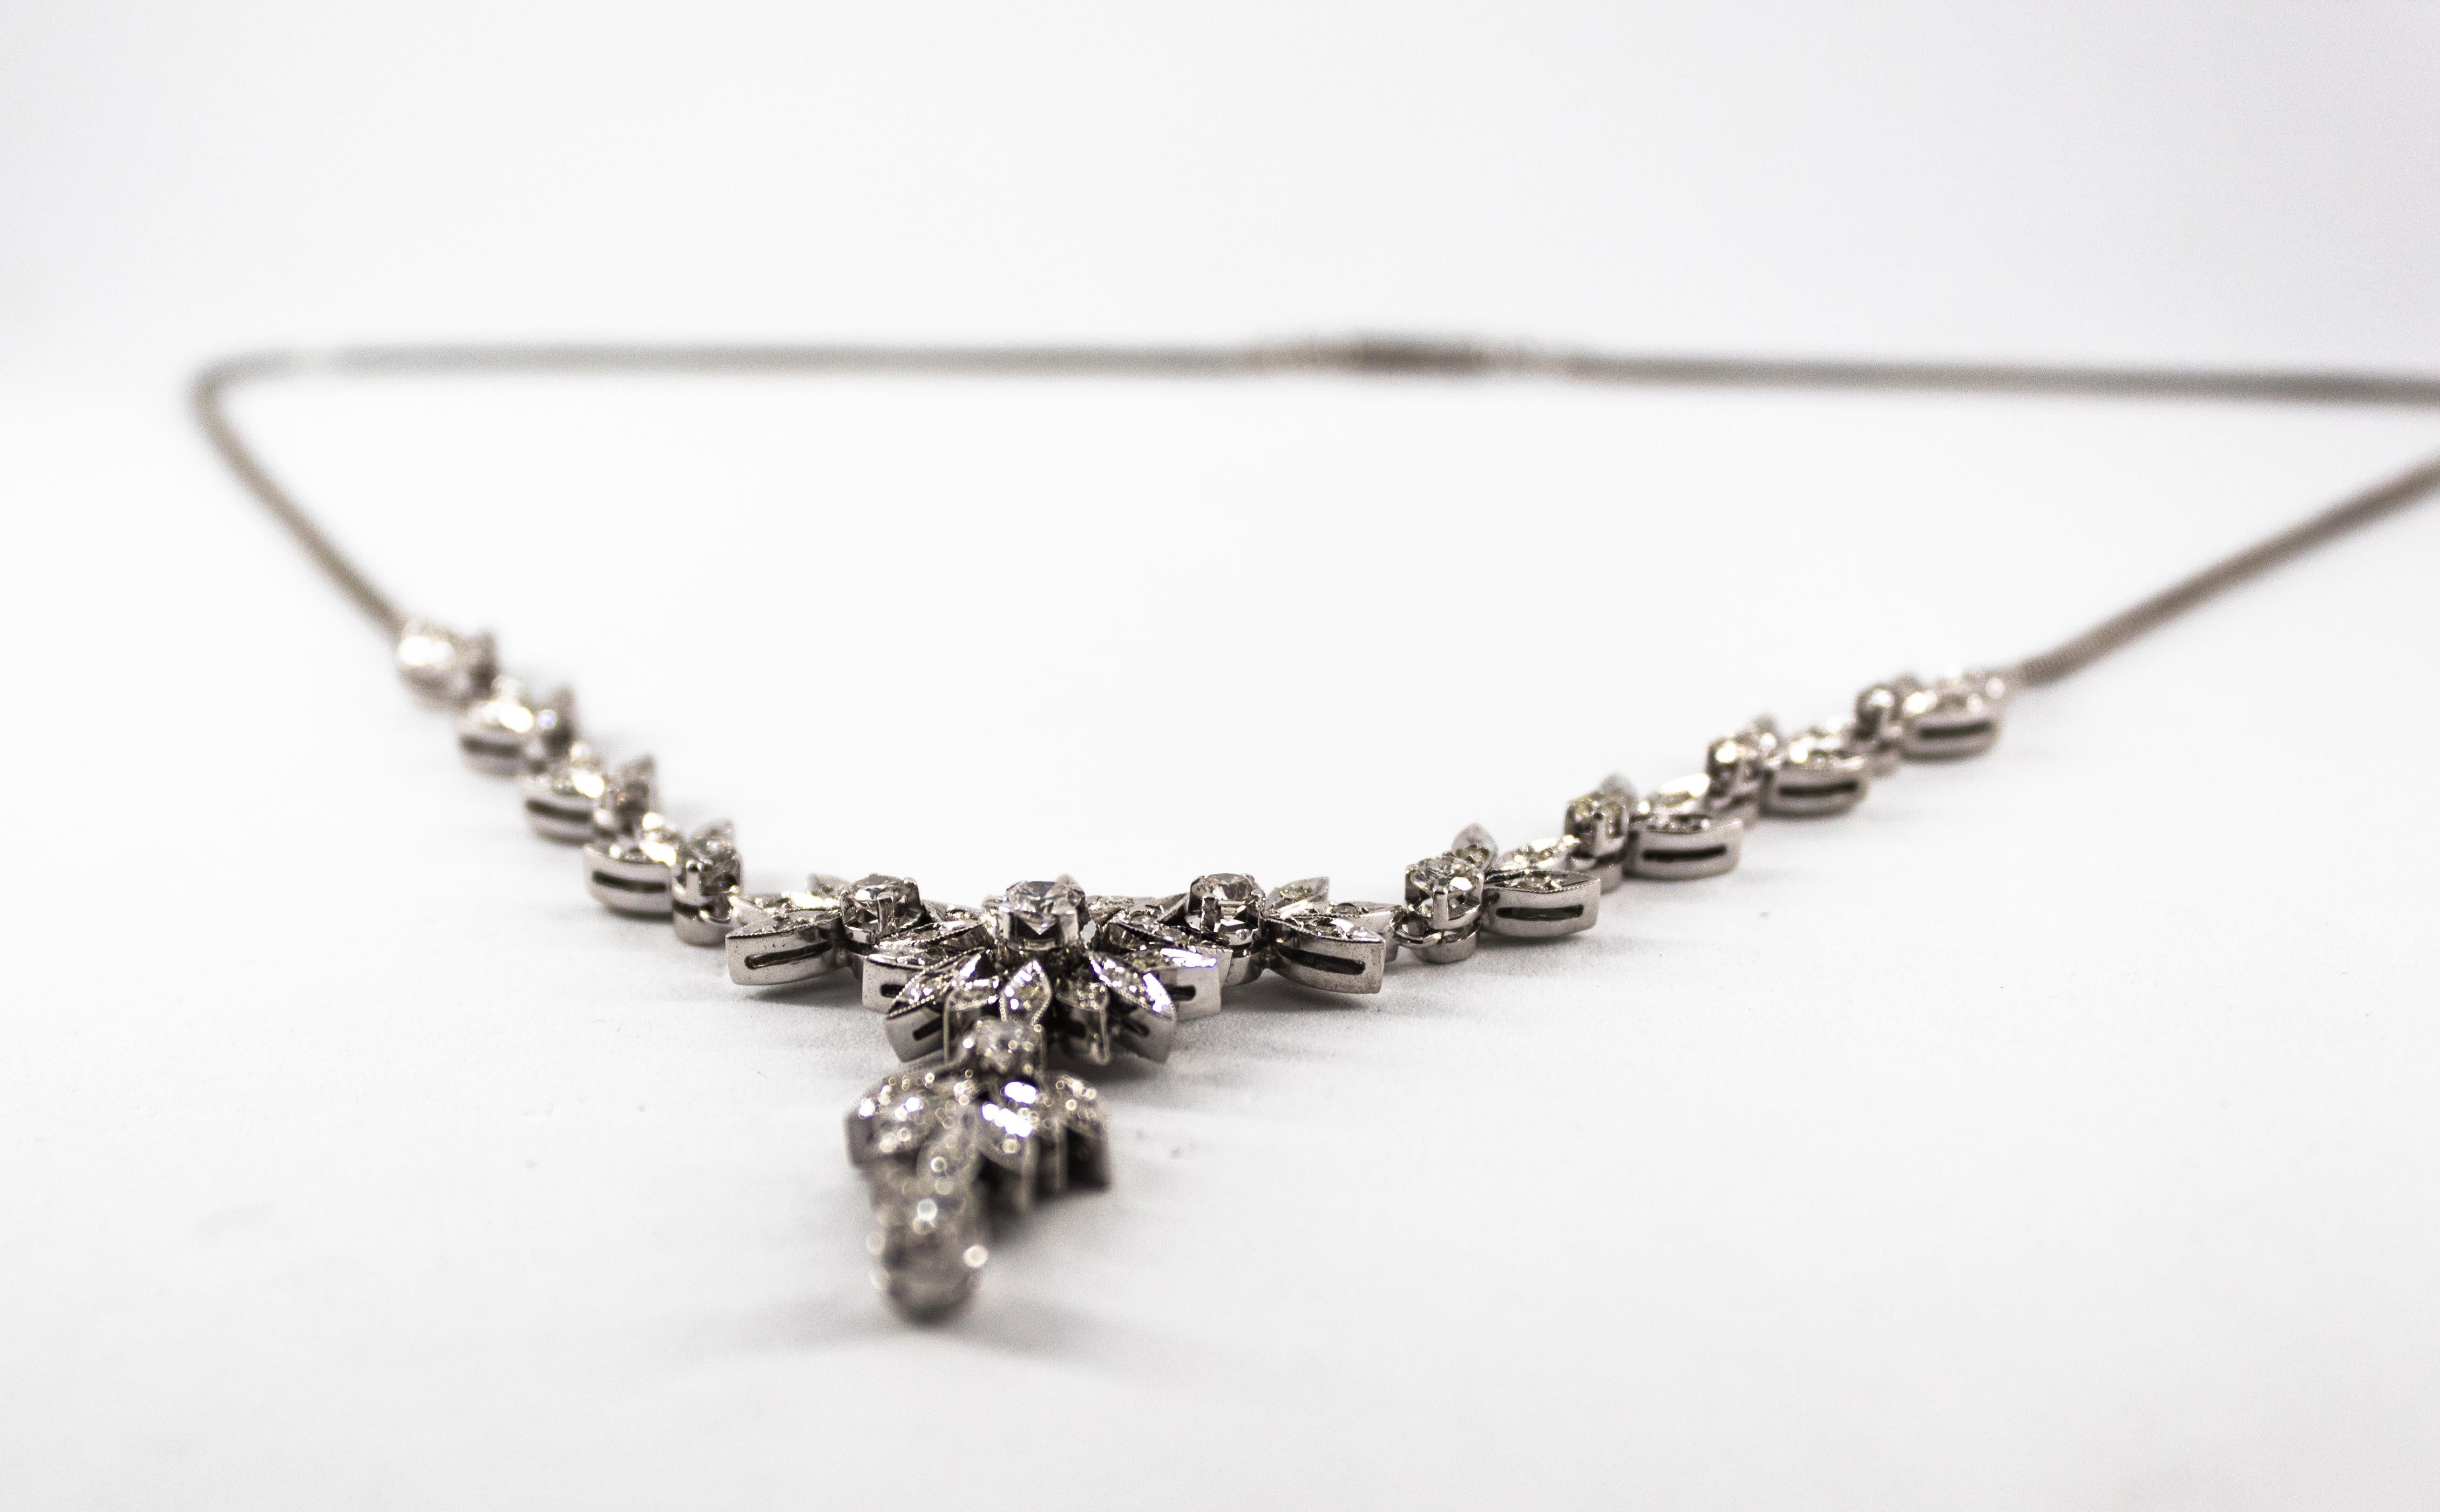 This Necklace is made of 18K White Gold.
This Necklace has 2.20 Carats of White Diamonds.
This Necklace is inspired by Art Nouveau.
The Necklace Length is 45cm.
We're a workshop so every piece is handmade, customizable and resizable. 